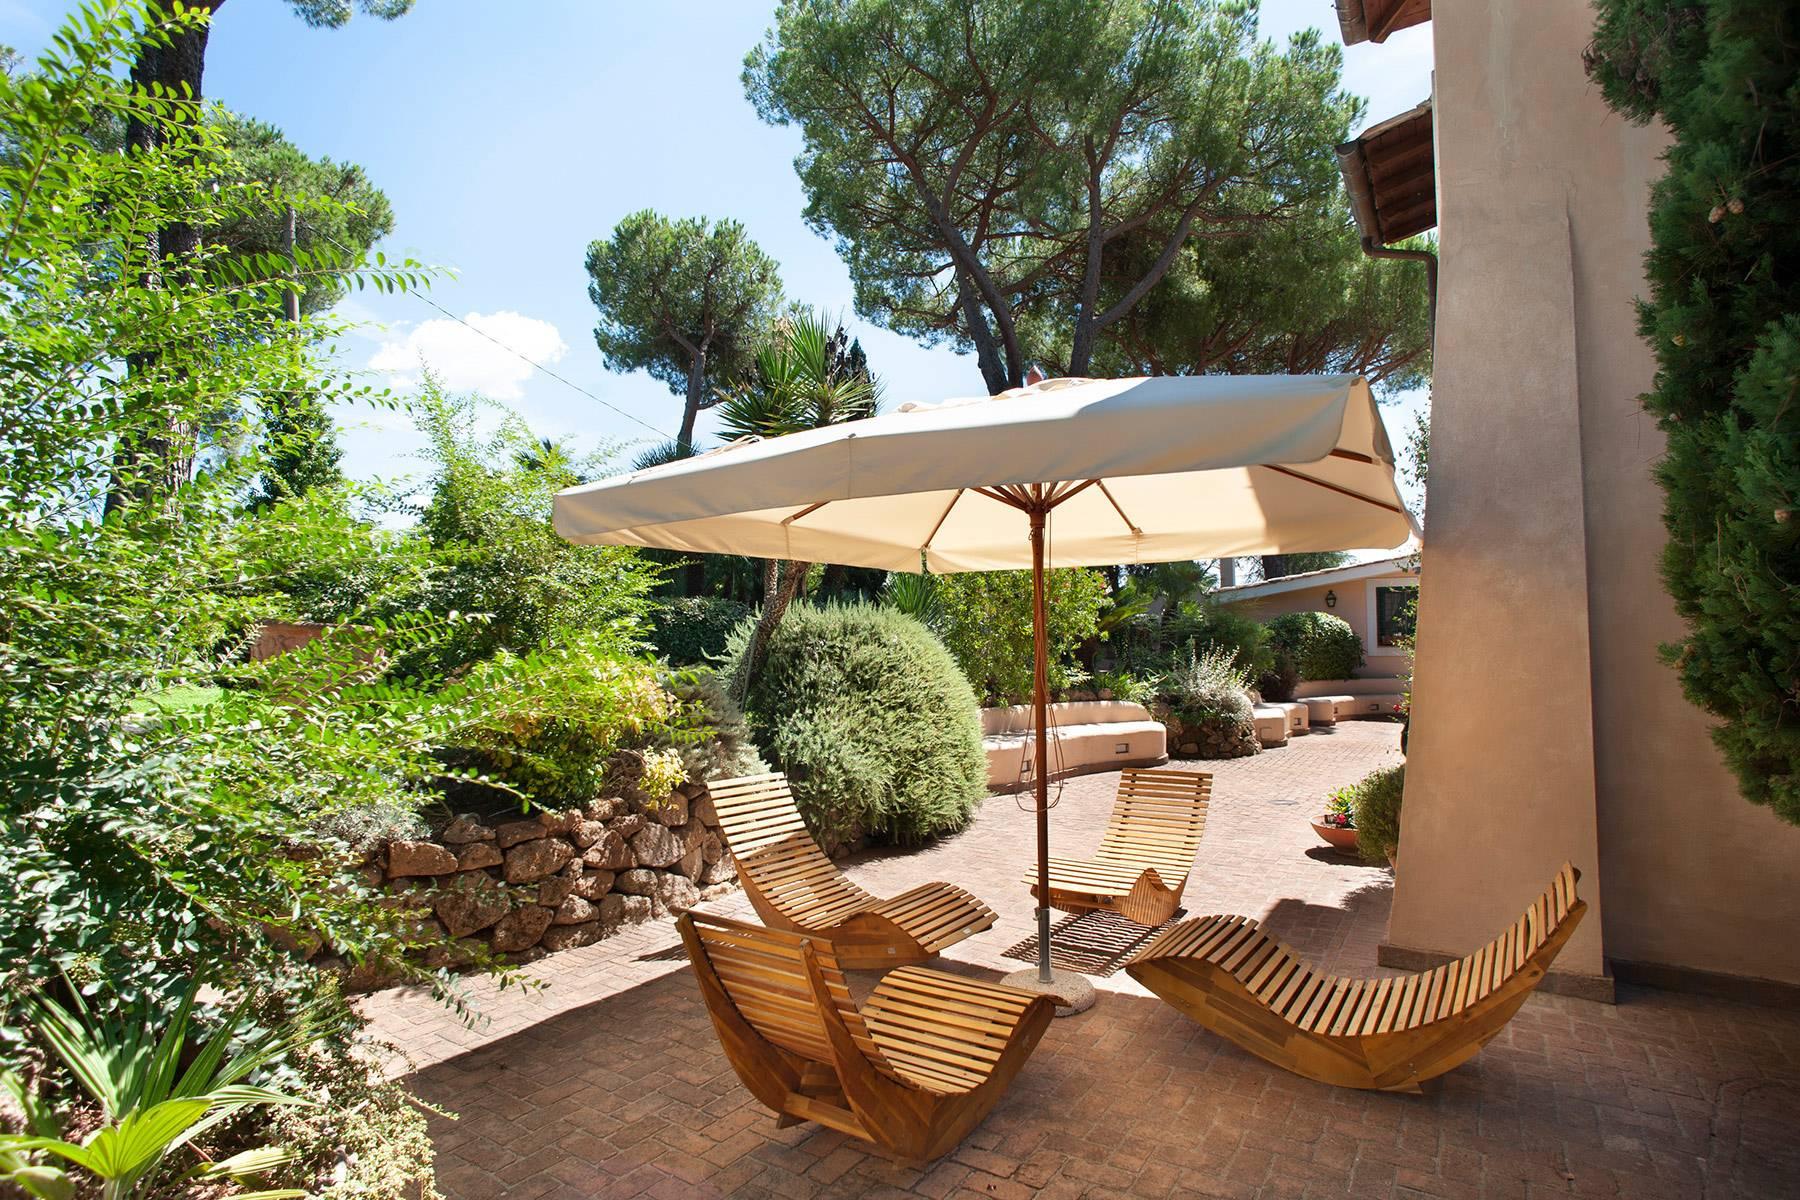 Villa Nayara - Lovely mansion with swimming pool 30 minutes from Rome - 17